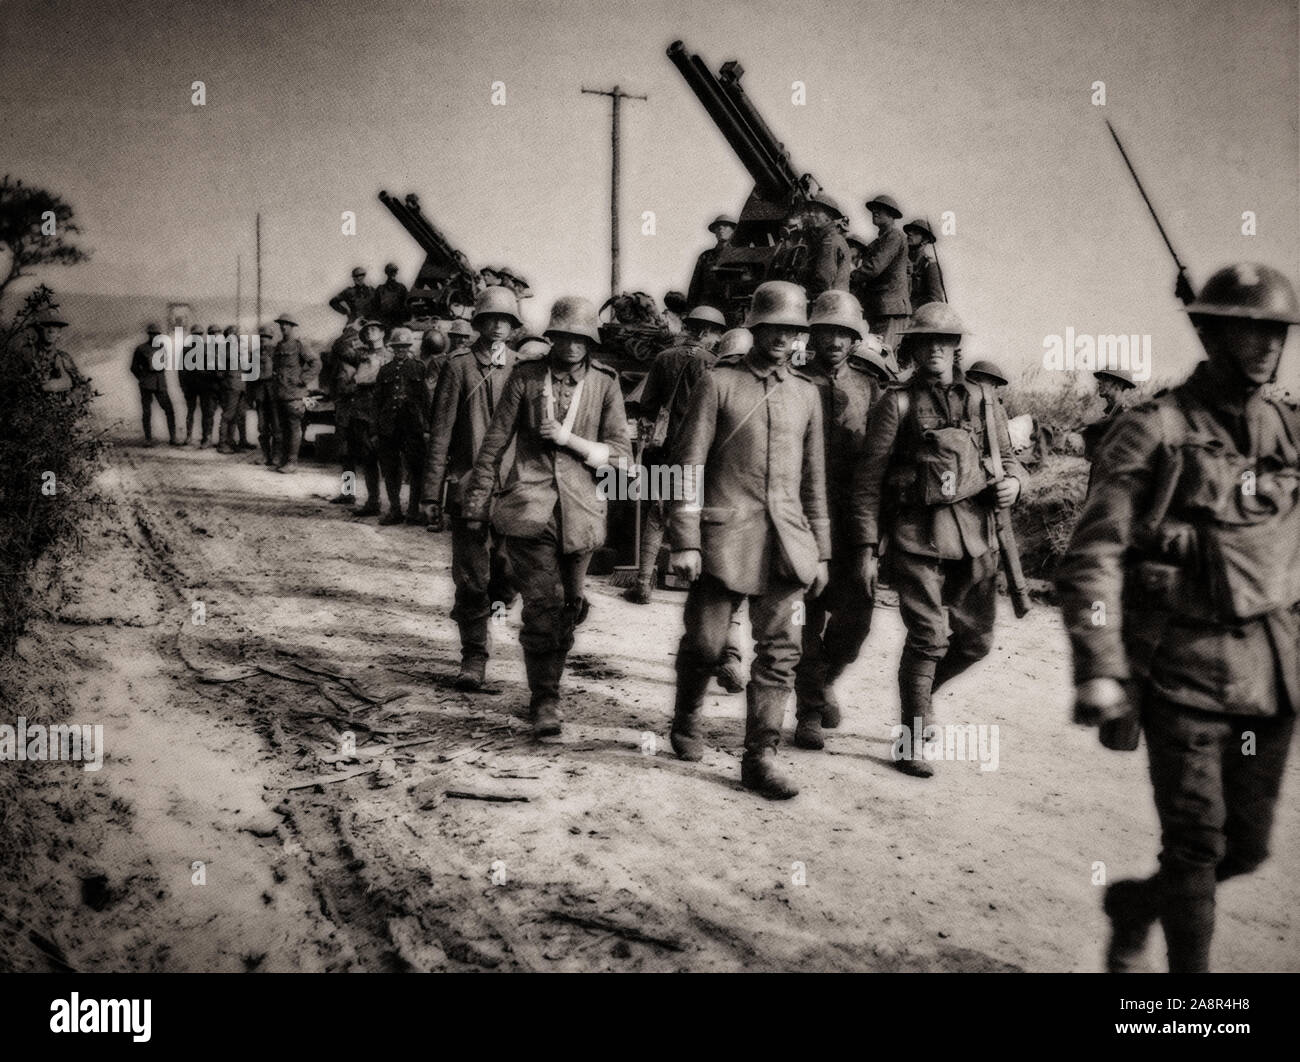 German prisoners of war escorted to the rear lines on the Black day of 8th August 1918. Earlier in March 1918, the Germans launched their Spring Offensive, consisting of four different major battles between March and July, that drove the Allies reeling back more than 50 miles. In the early morning hours of August 8, 1918, the German Army, depleted and exhausted by months of attacking, were taken completely by surprise when the British Fourth Army attacked and, by the end of the day, had punched a hole 15 miles wide in the front. Stock Photo